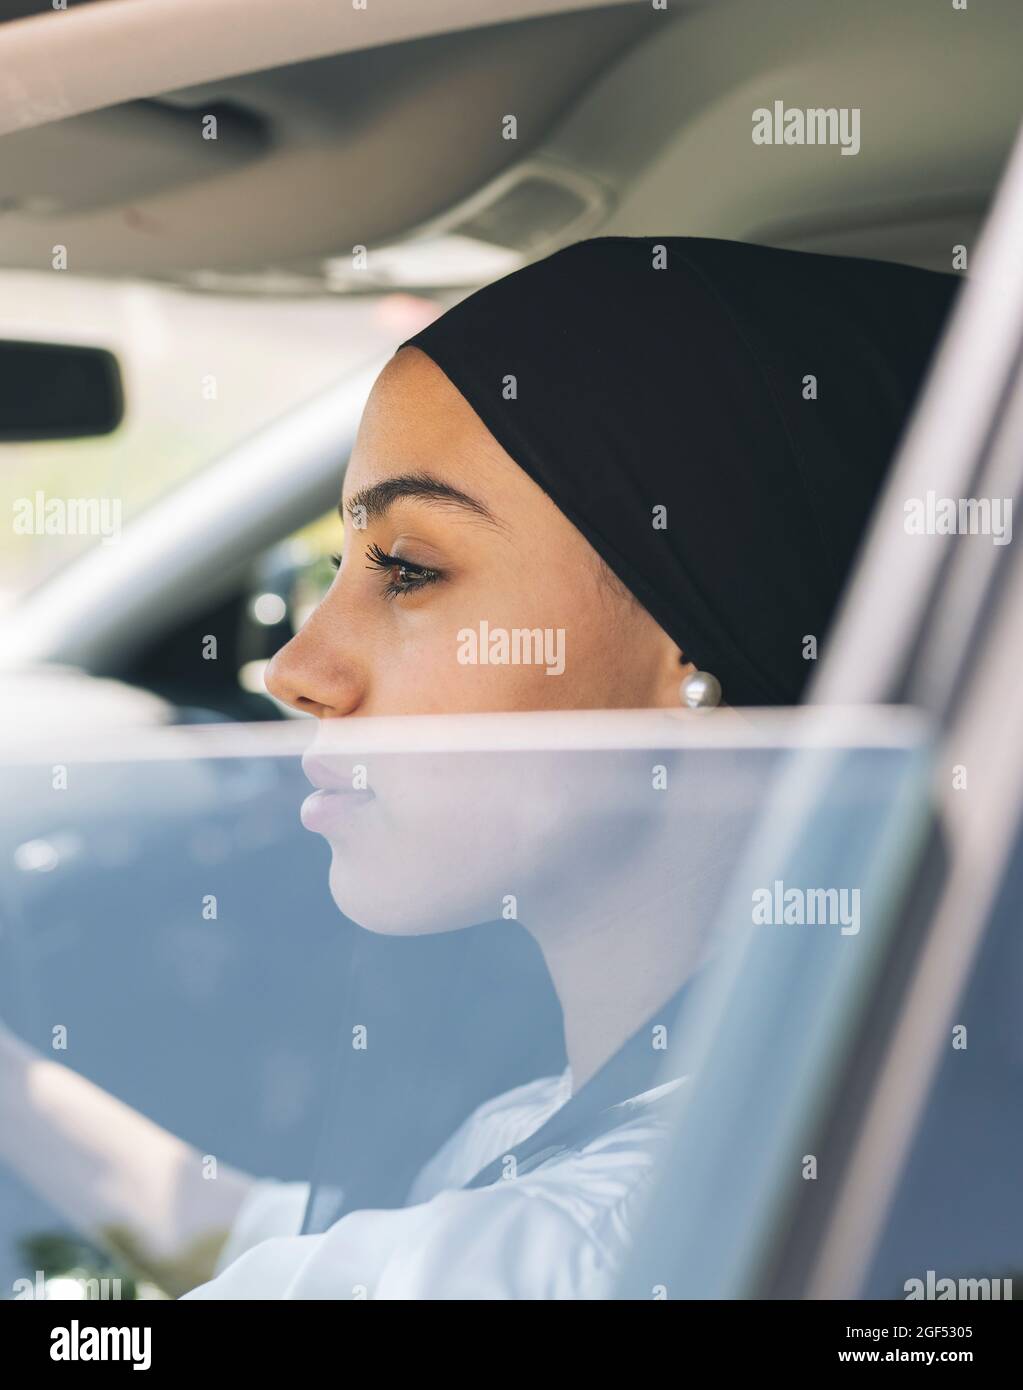 Woman looking through window while sitting in car Stock Photo